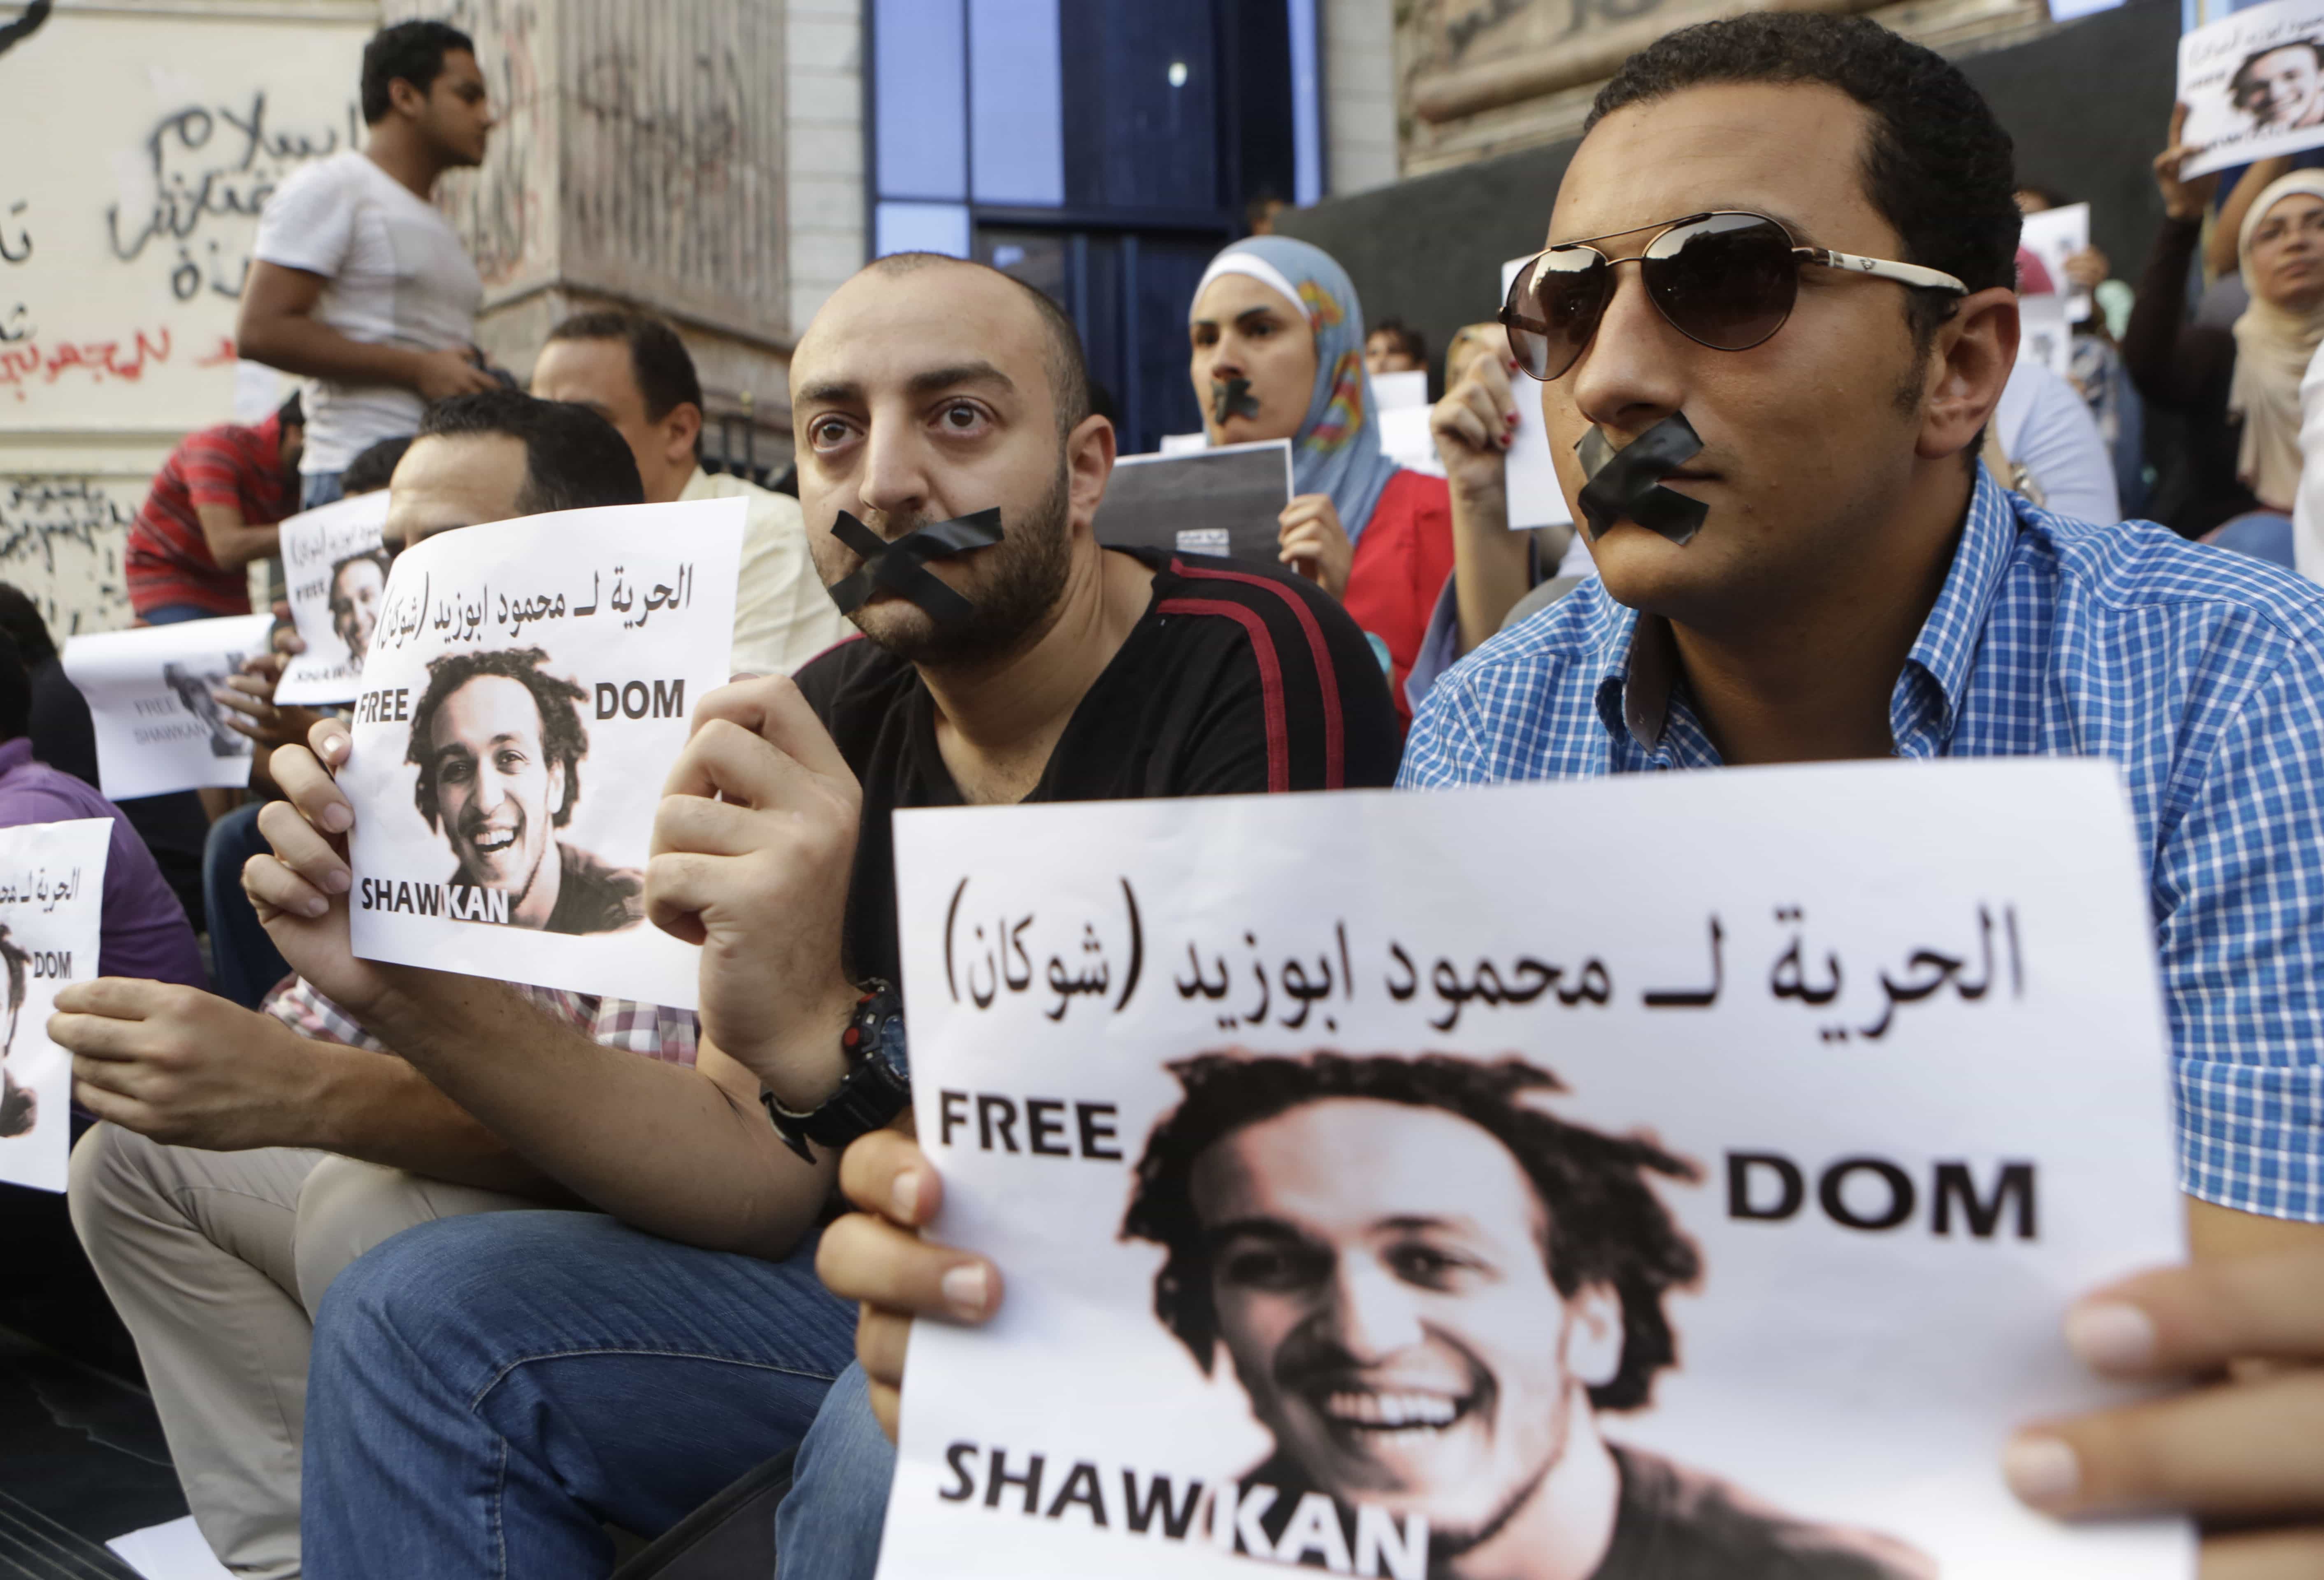 Egyptian journalists tape their mouths and hold signs during a 2014 protest , AP Photo/Amr Nabil, File